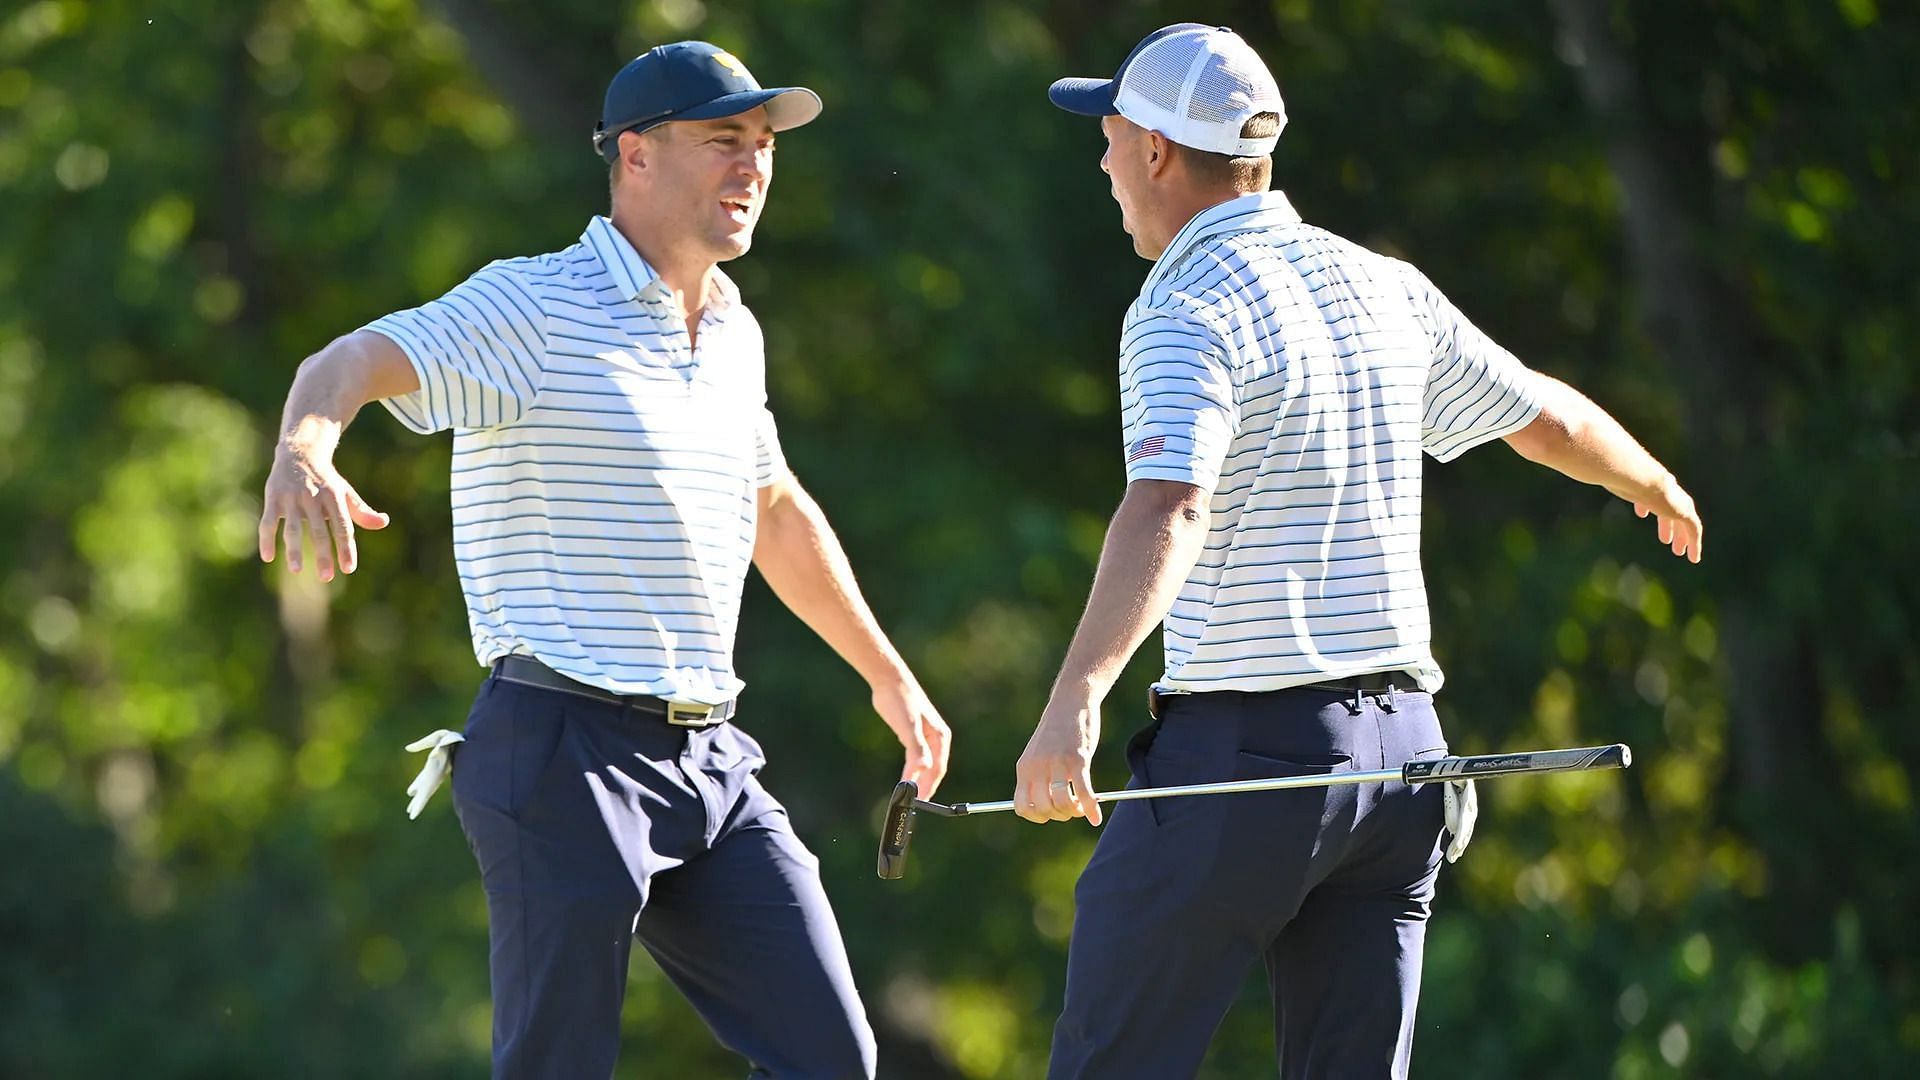 Good friends Justin Thomas and Jordan Spieth will be in the other team